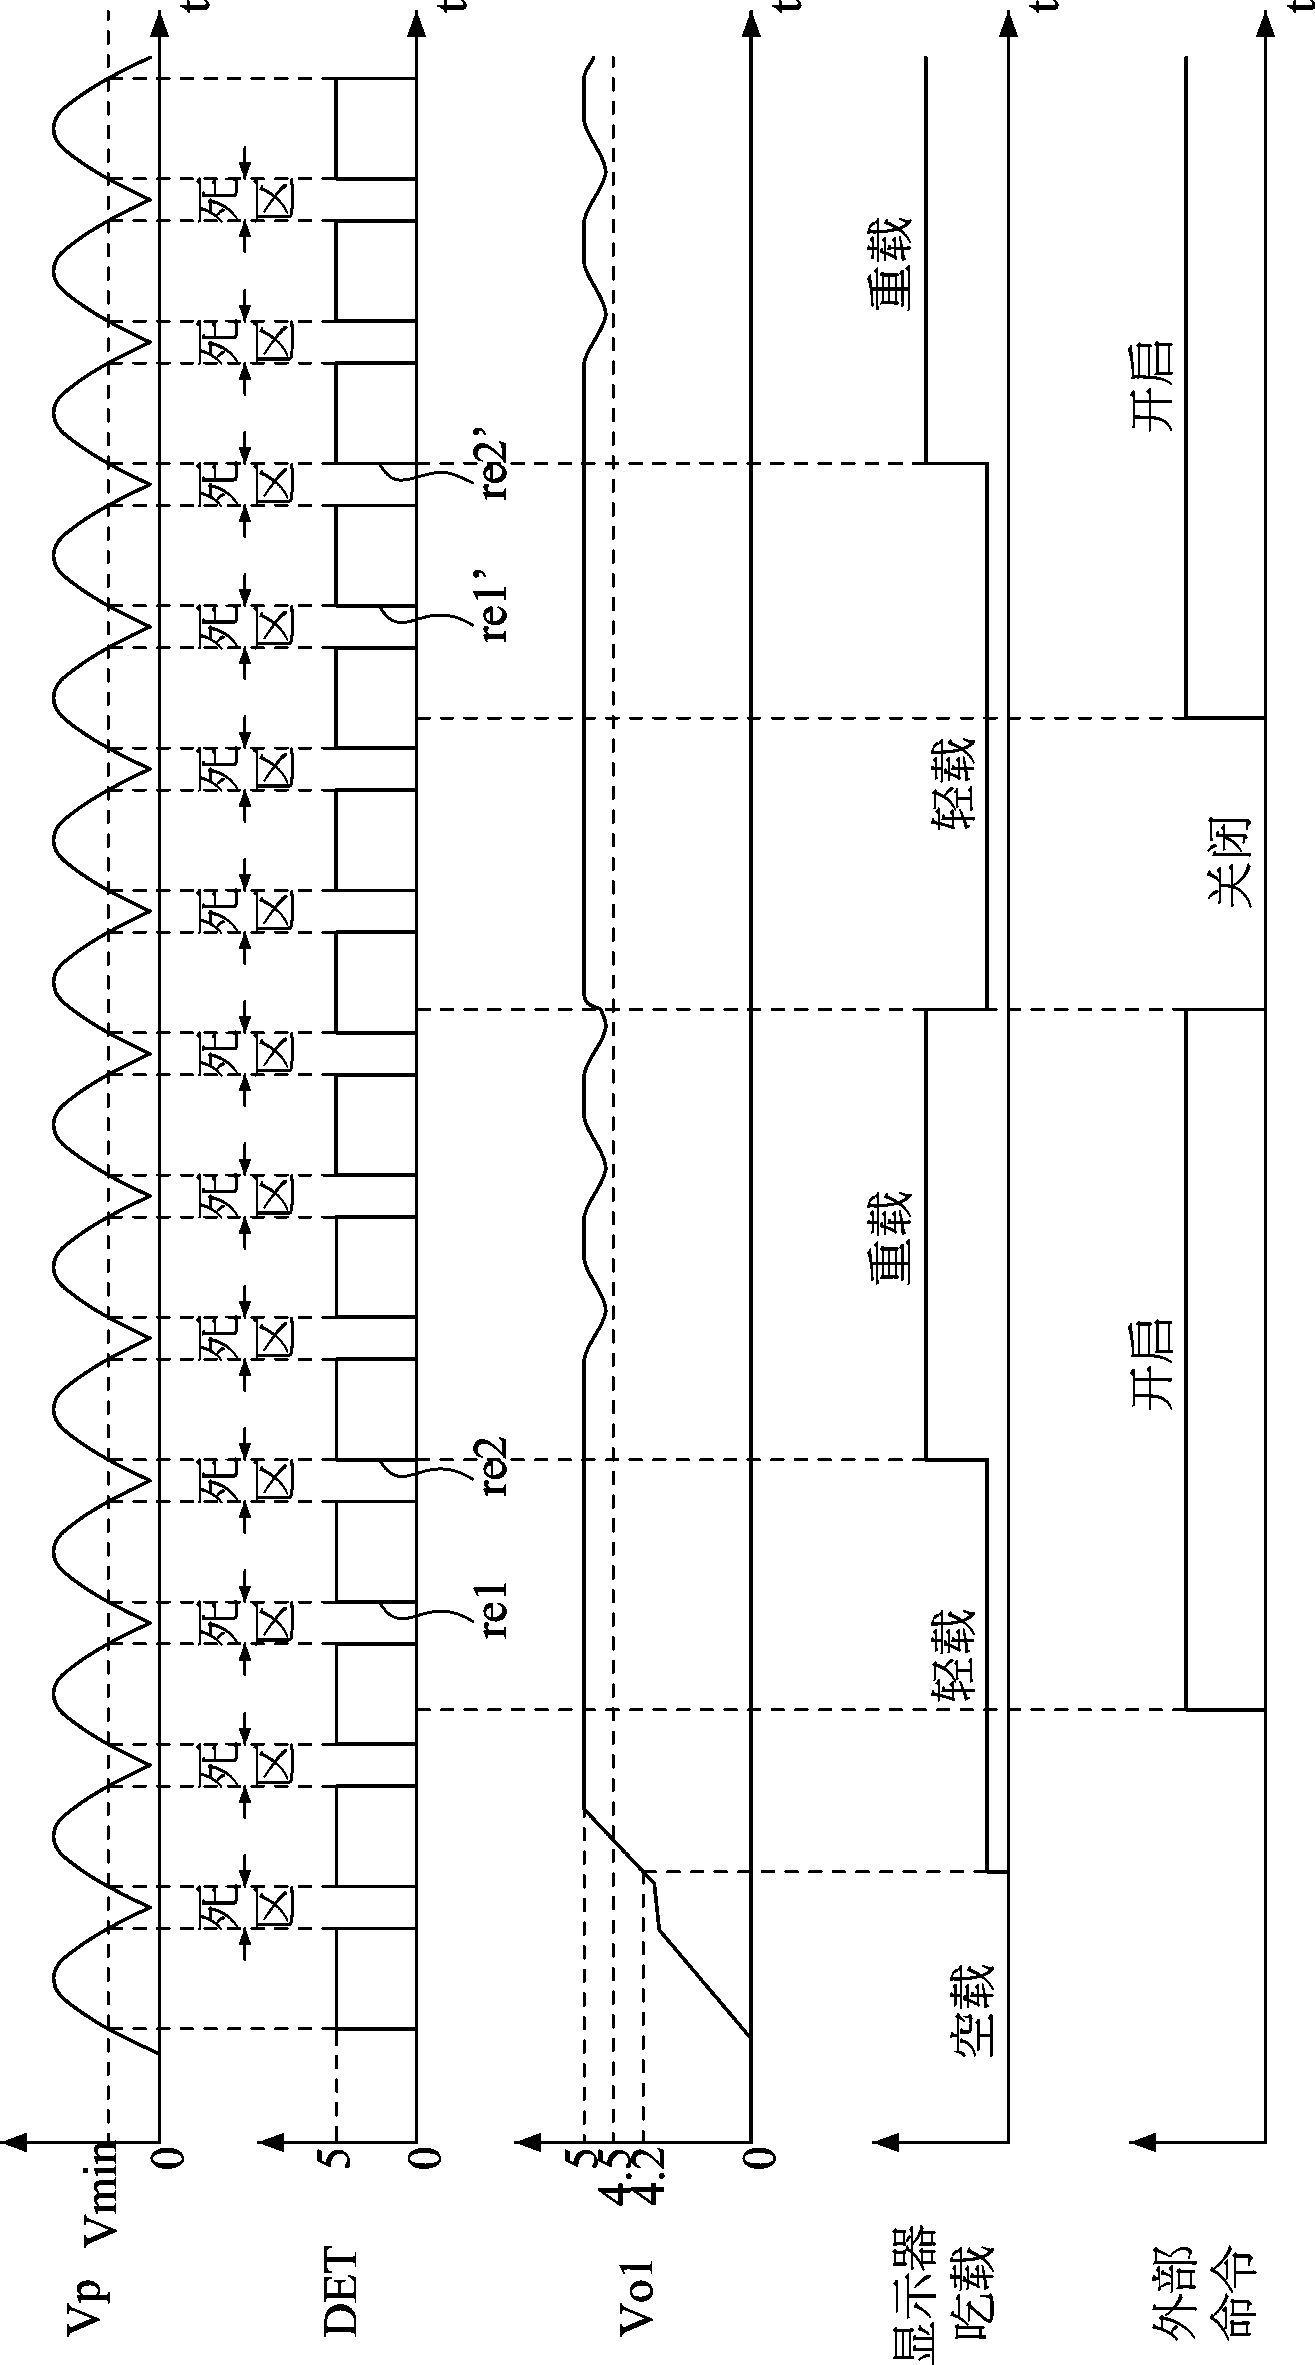 Power supply without high-voltage electrolysis electrolytic capacitor